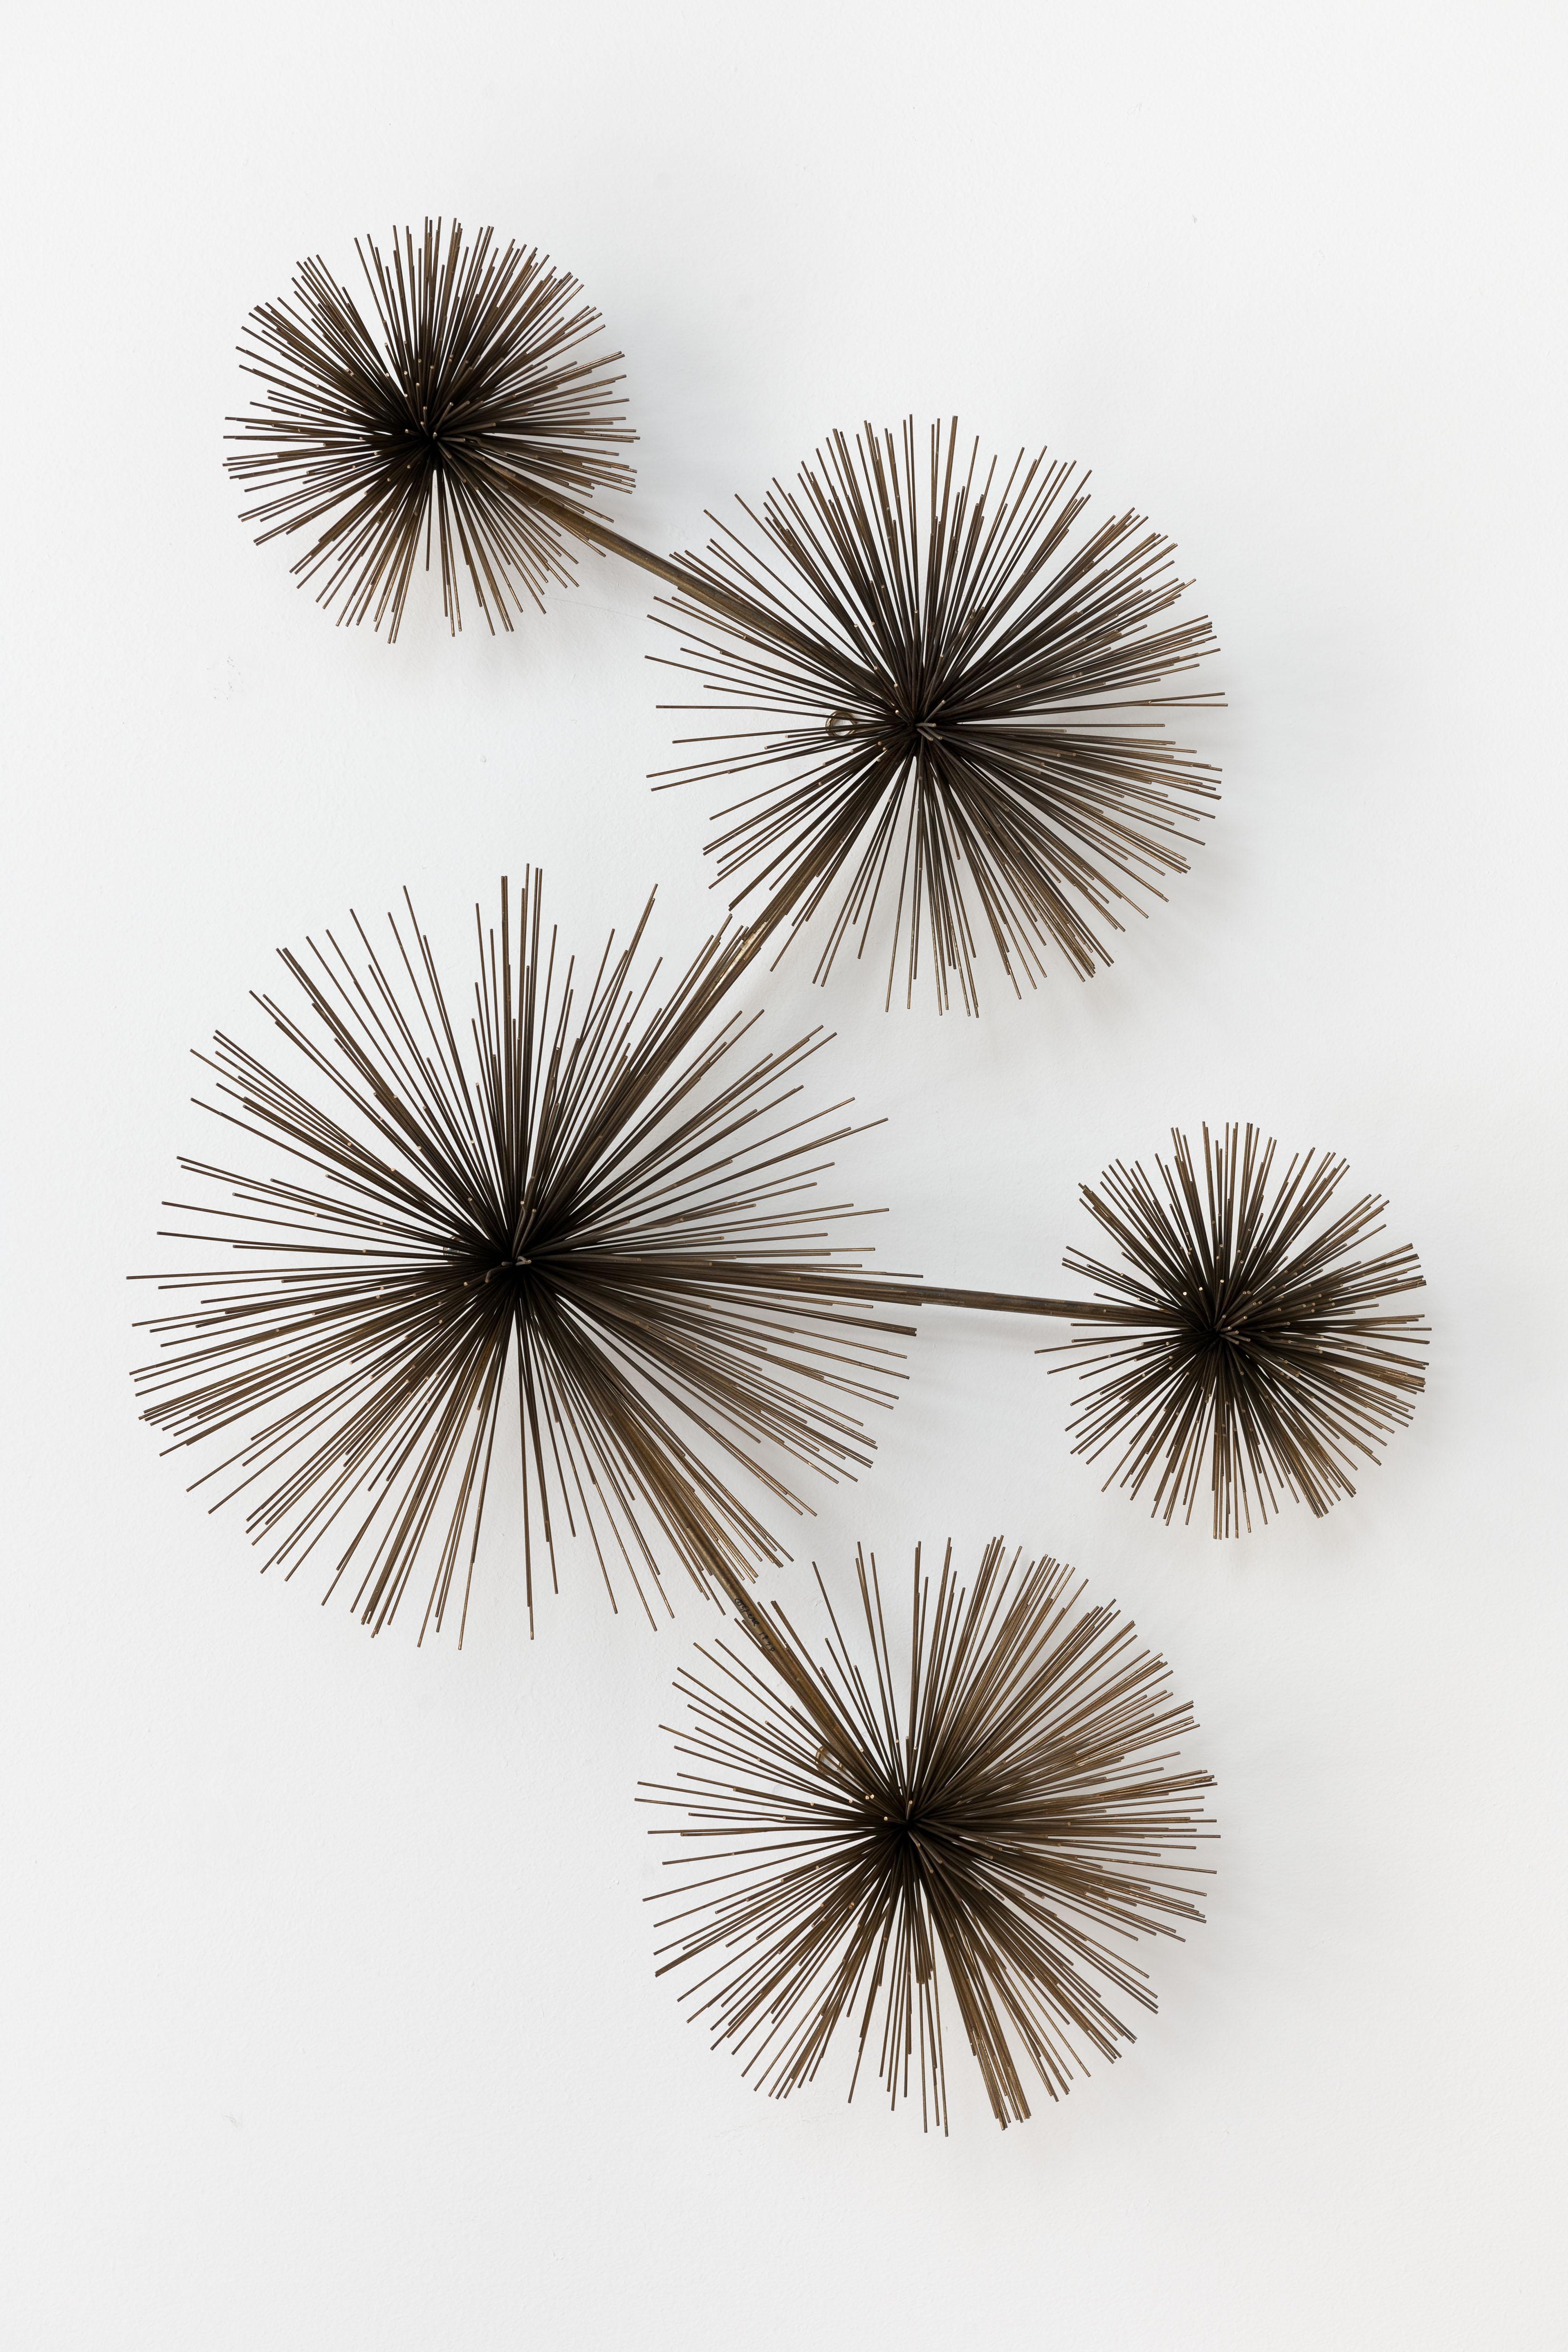 Vintage iconic C. Jere metal 'Pom Pom' or 'Sea Urchin' wall sculpture by Artisan House executed in brass. 
Sculpture can hang by one to three hooks in horizontal or vertical. 
Object is fully signed and dated, 'C Jere 1979', see last image.